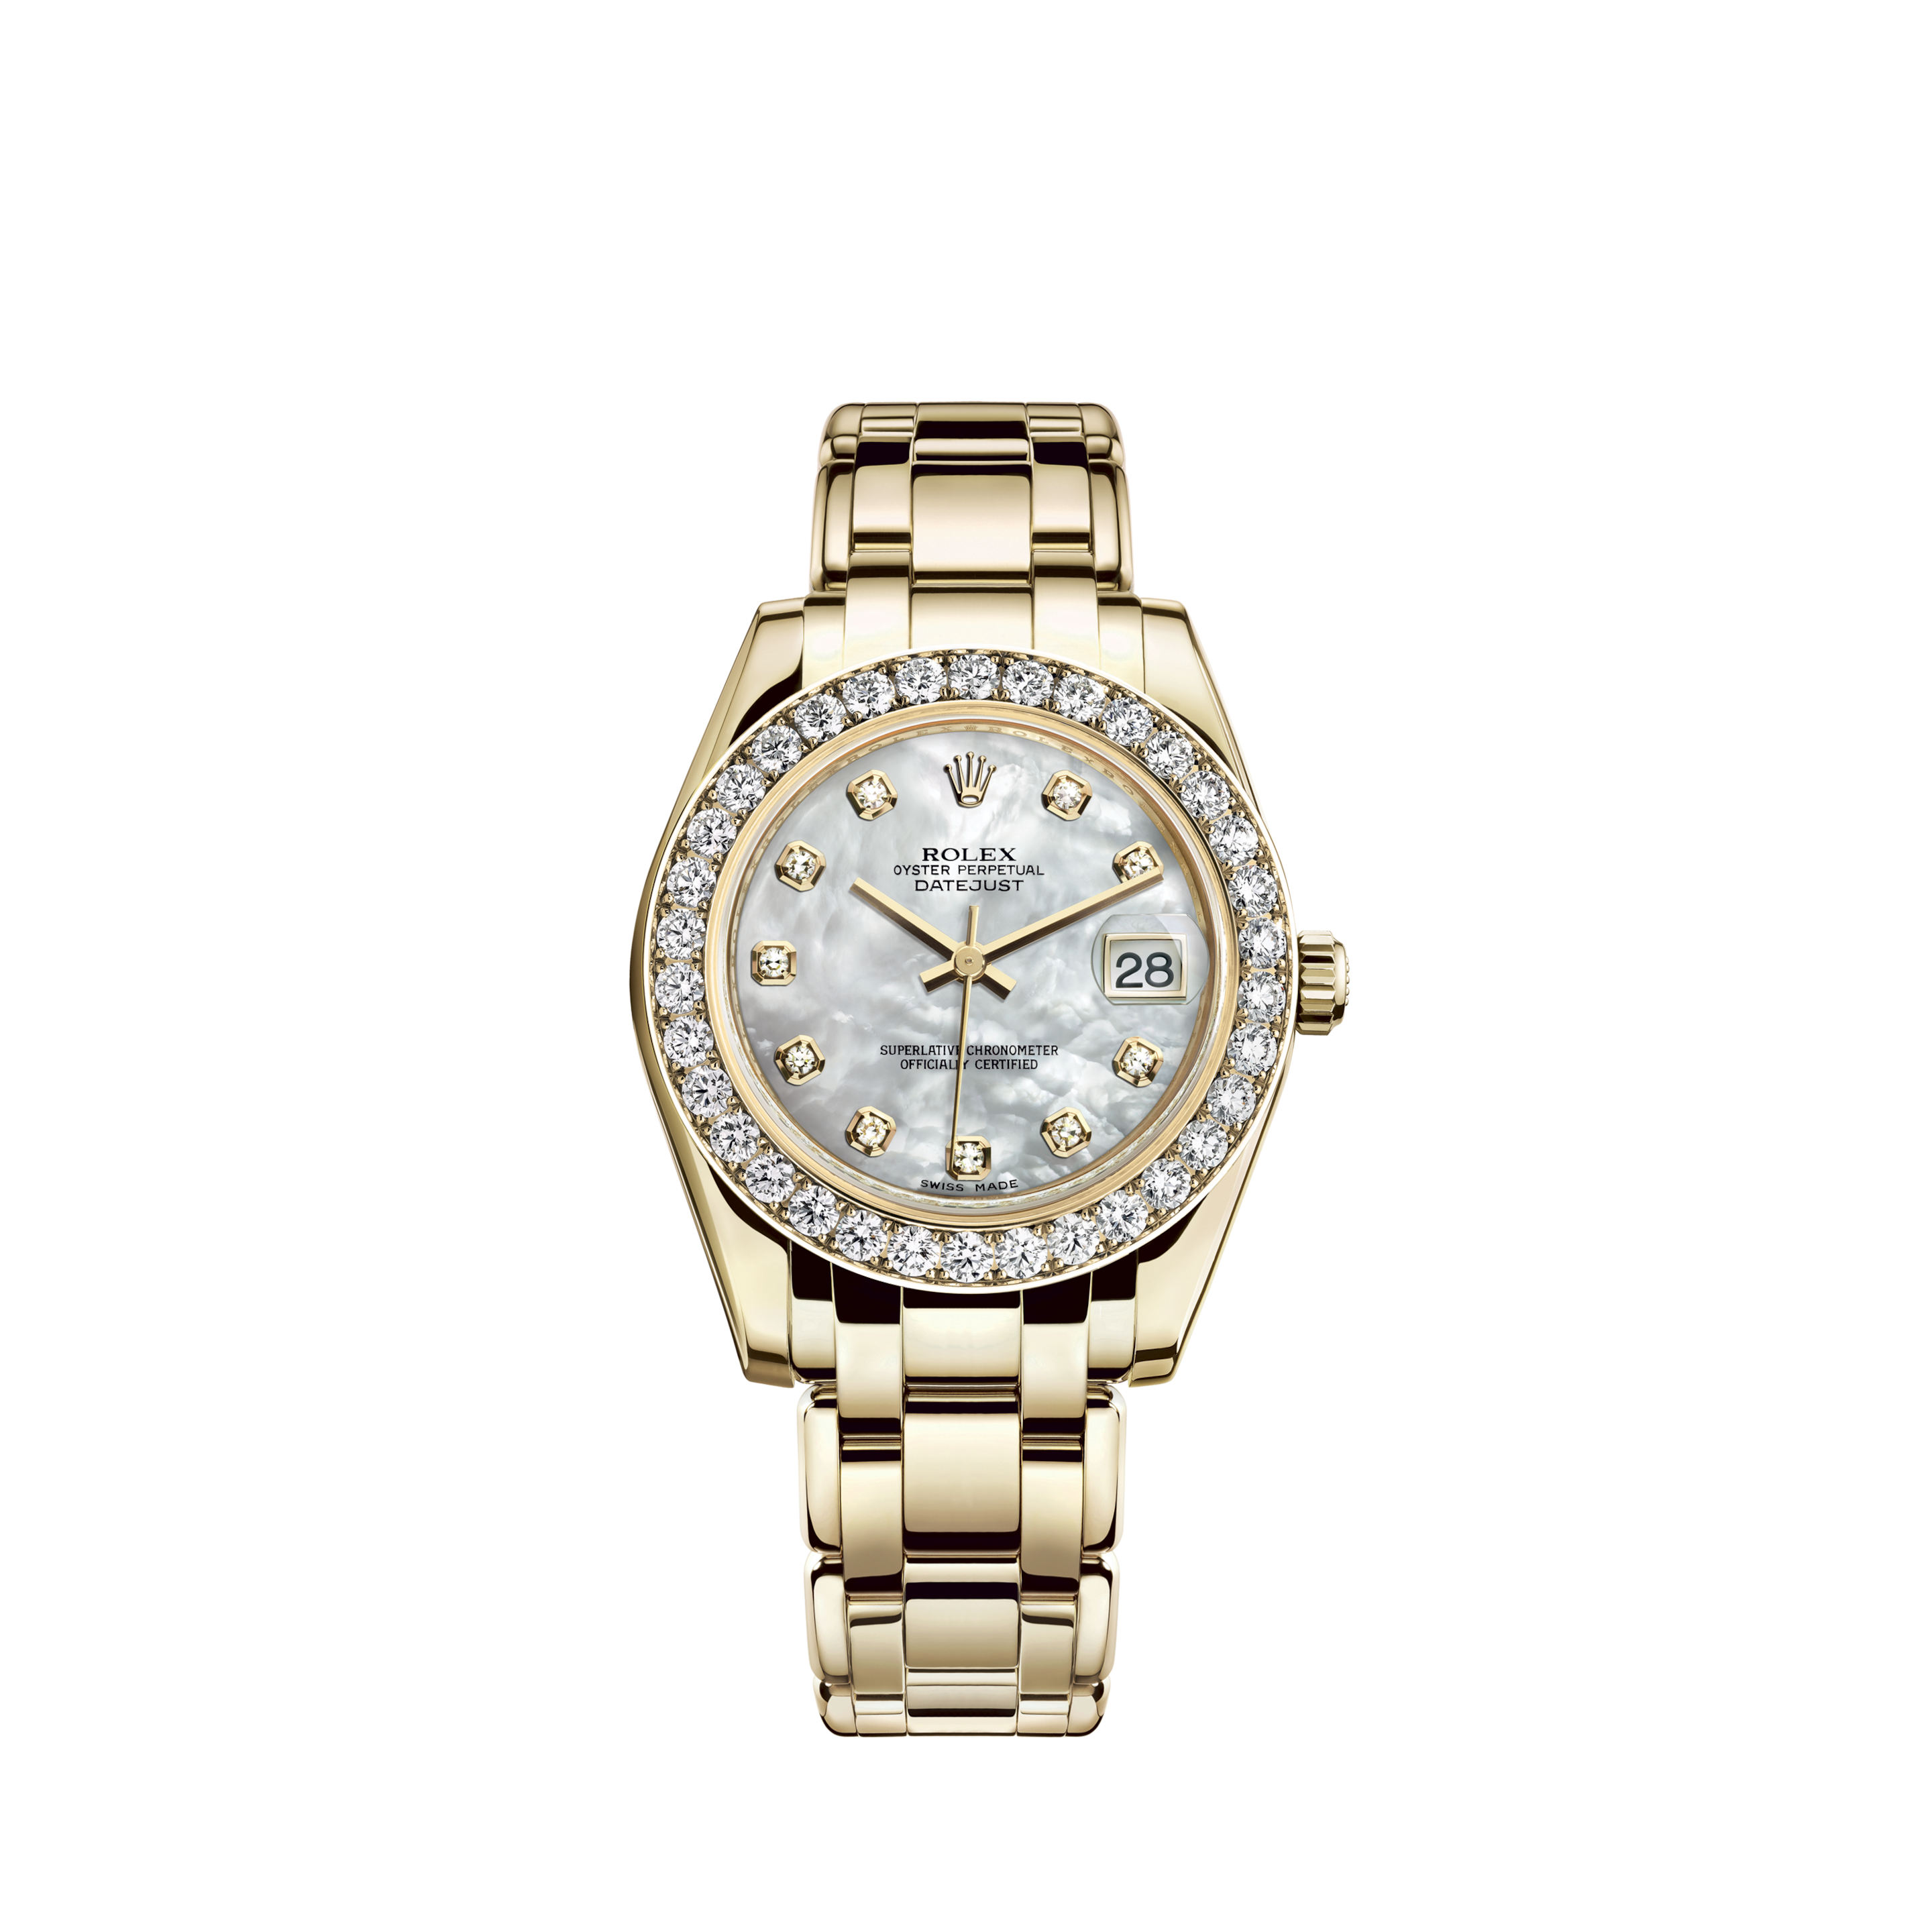 Rolex Datejust 36mm - Steel and Gold Yellow Gold - Domed Bezel - Oyster 126203 BKDO